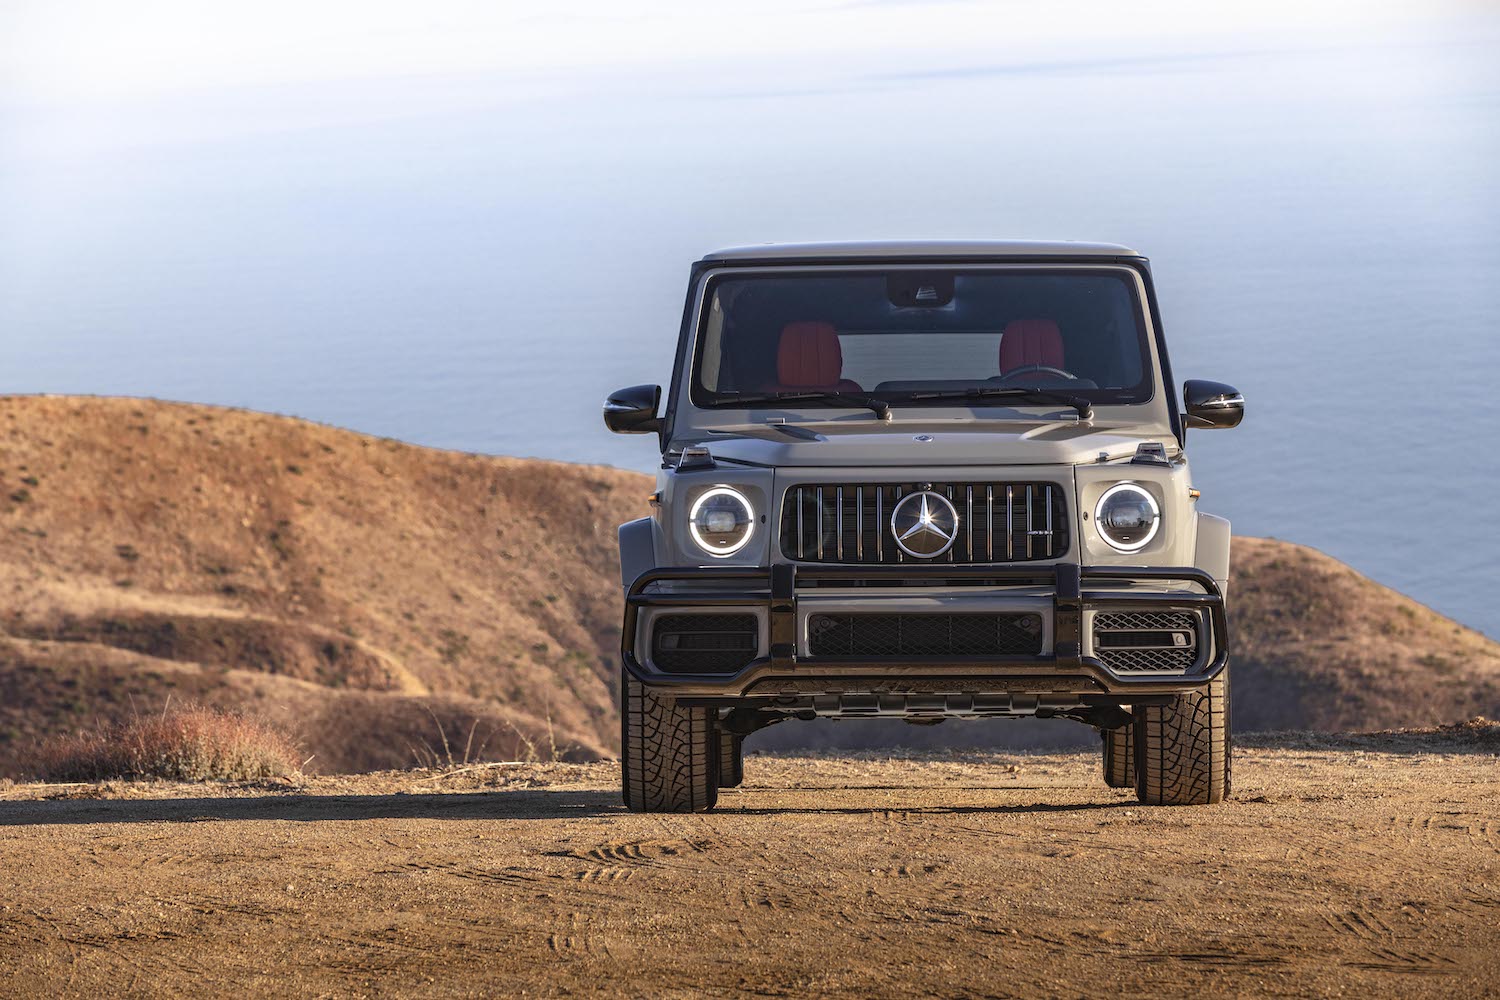 This is a promo photo of a 2021 G Class SUV parked on a sand dune in front of the ocean.